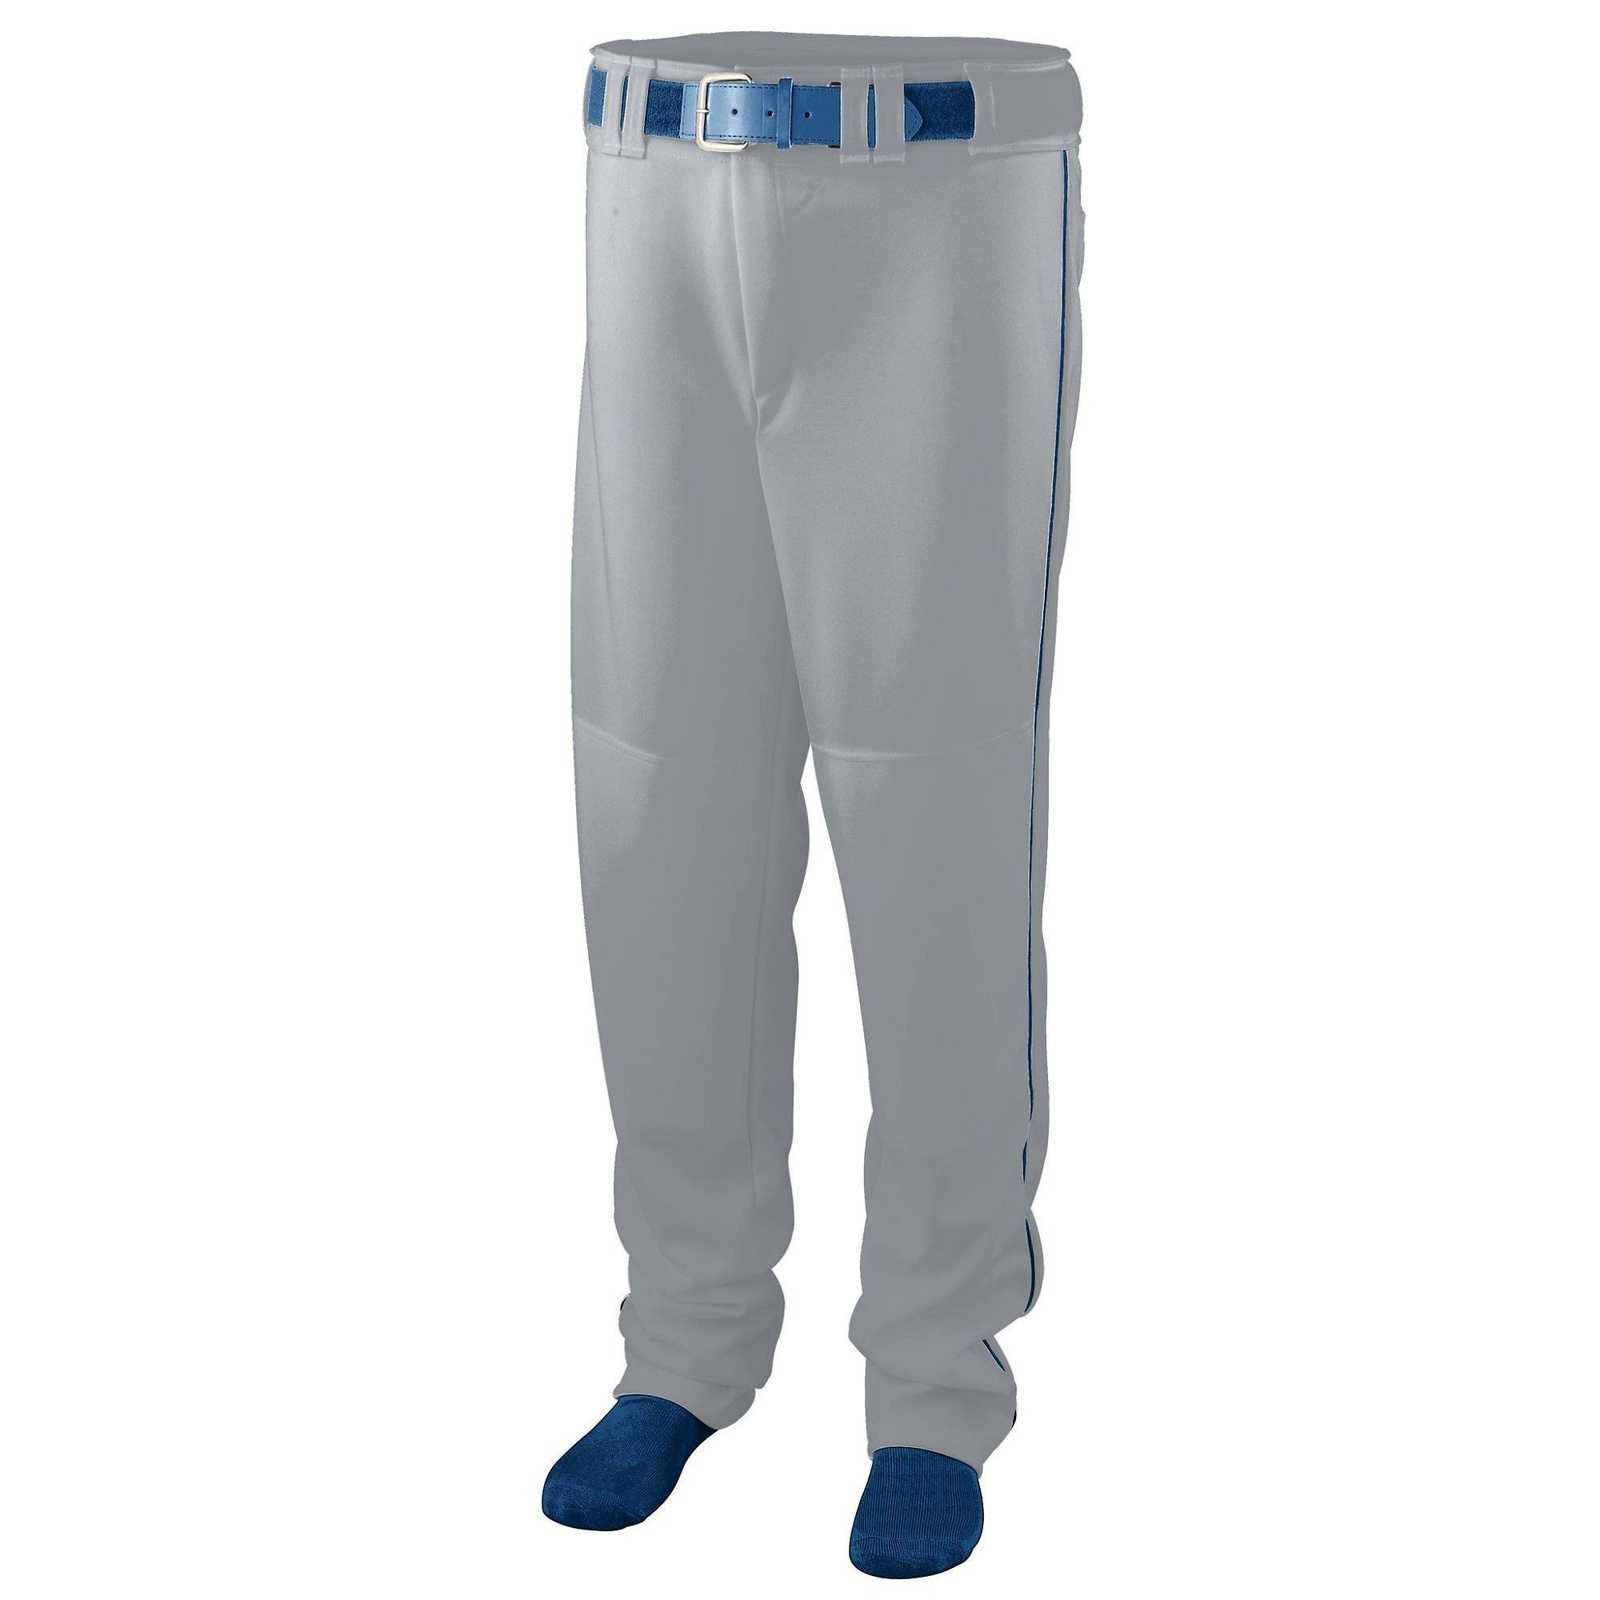 Augusta 1445 Series Baseball Softball Pant with Piping - Gray Navy - HIT a Double